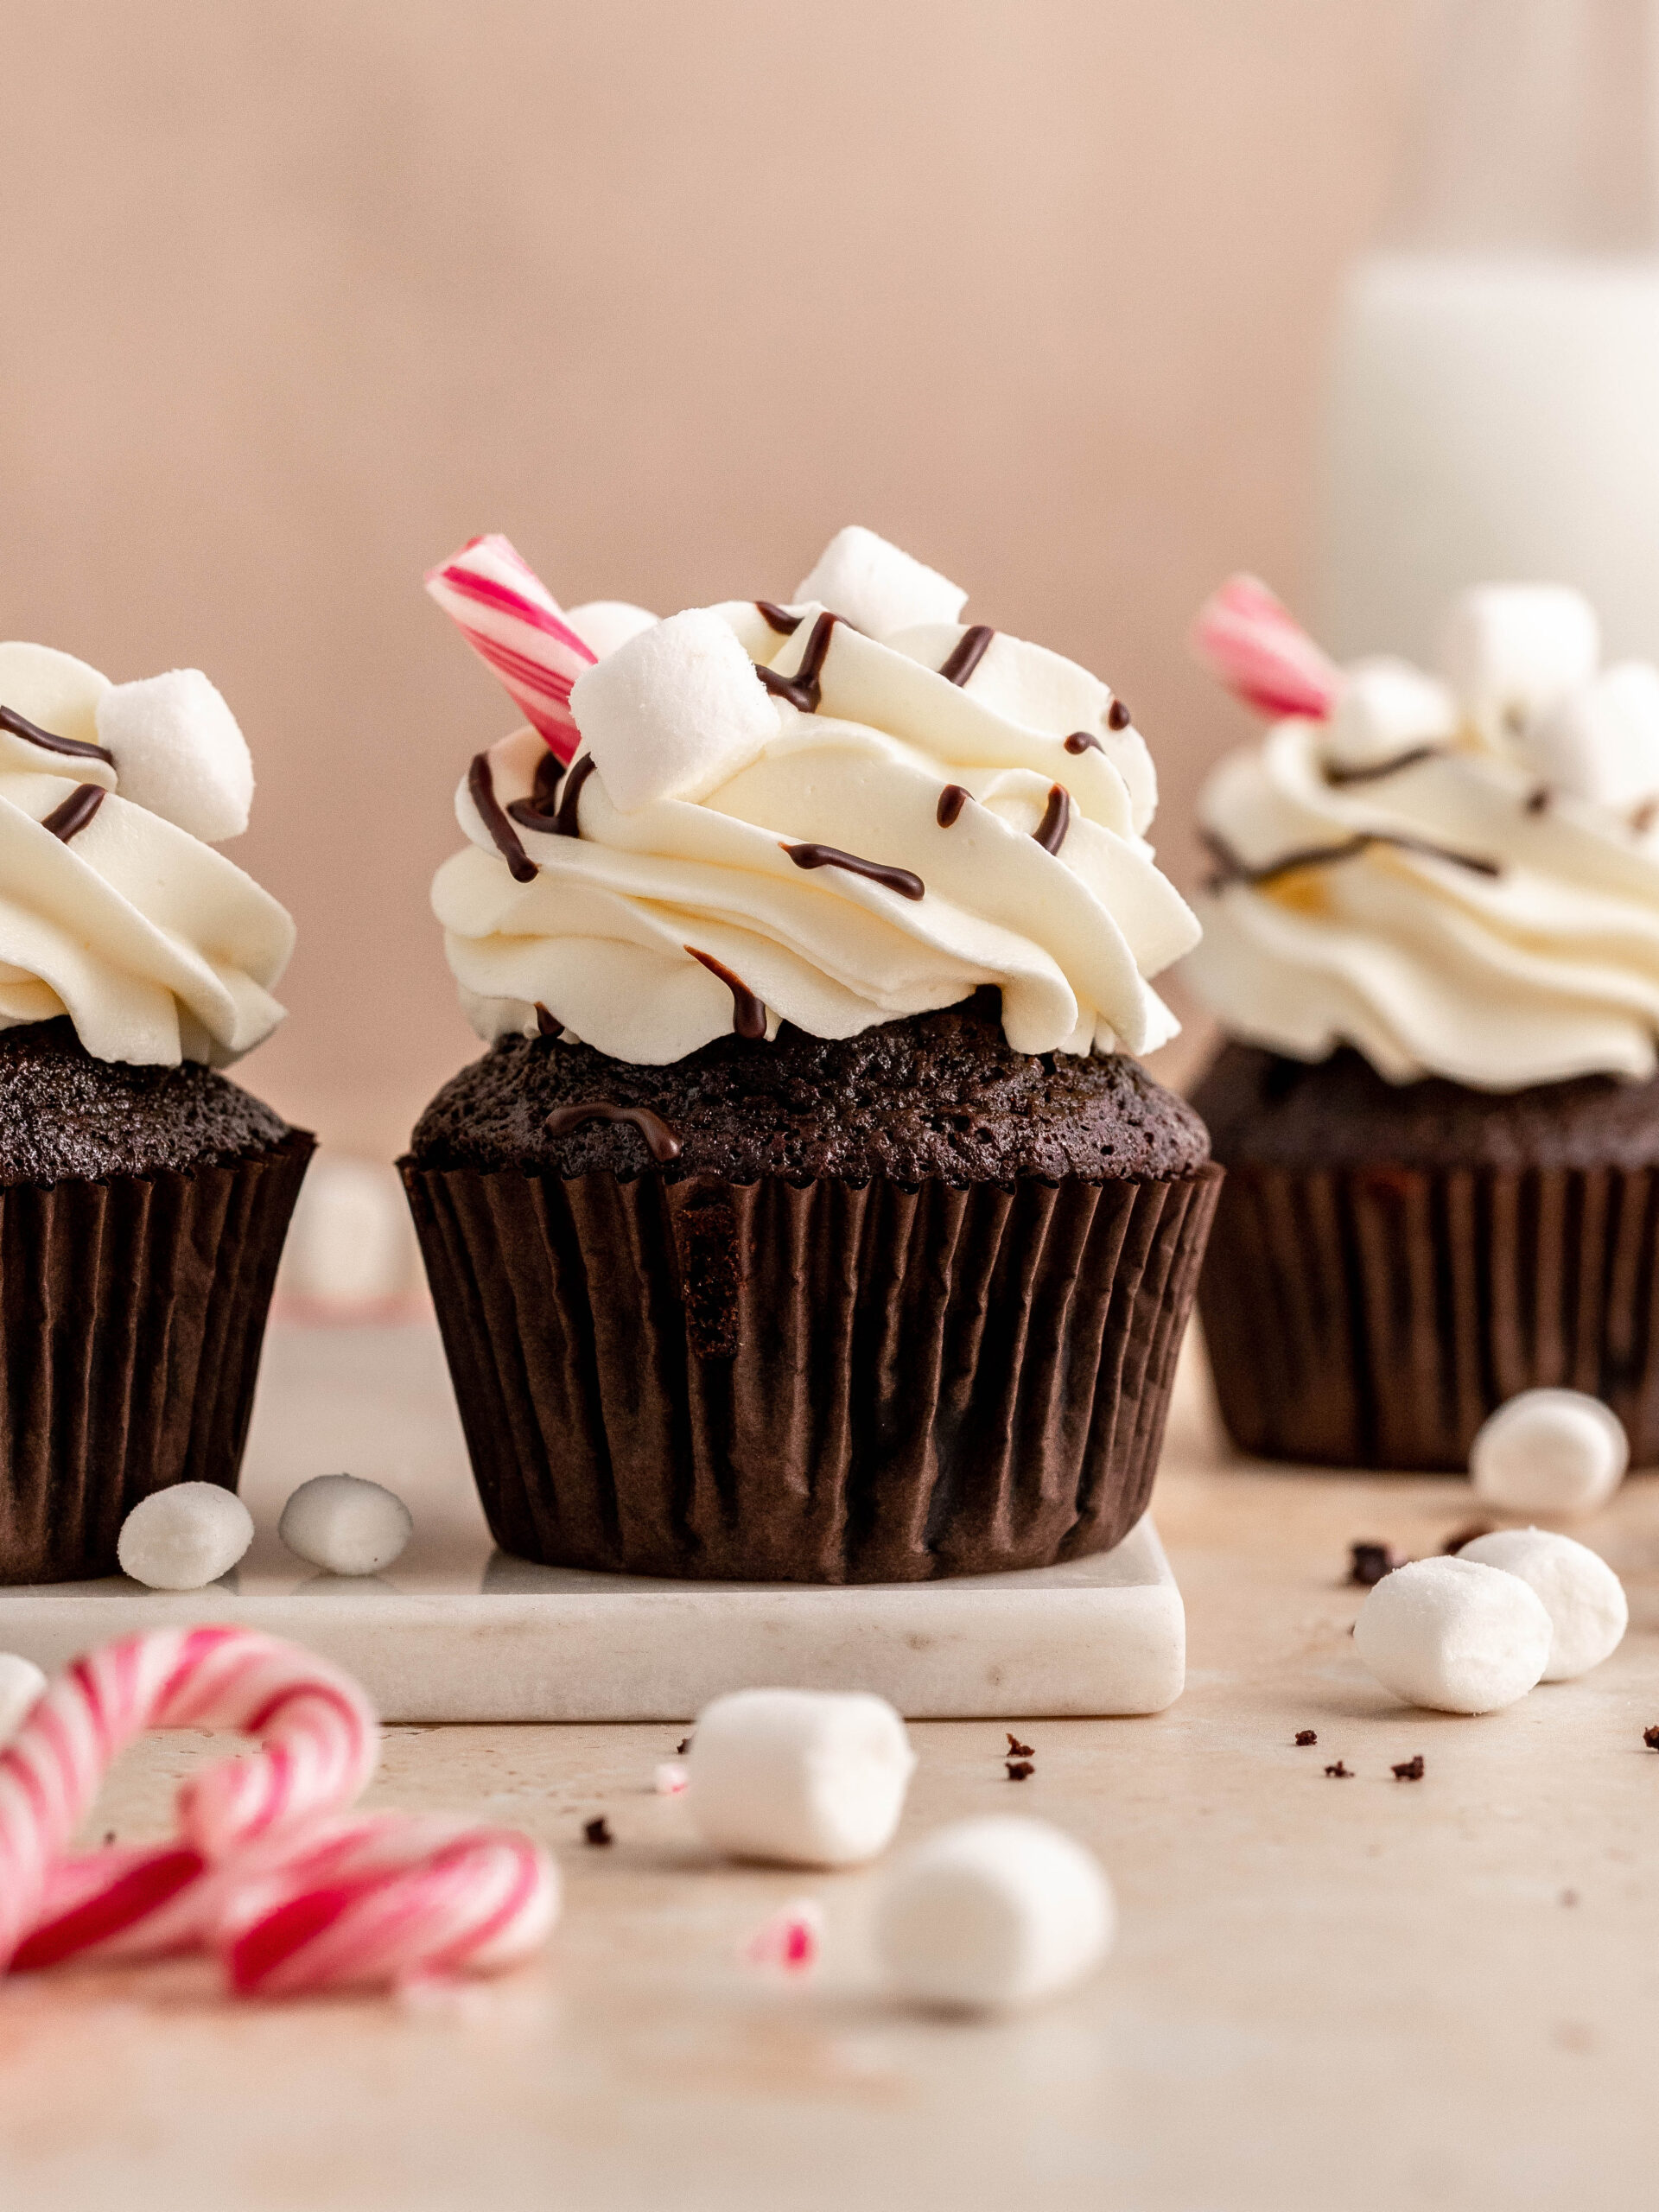 Finish them with decorating with hot fudge sauce, mini marshmallows and candy cans.